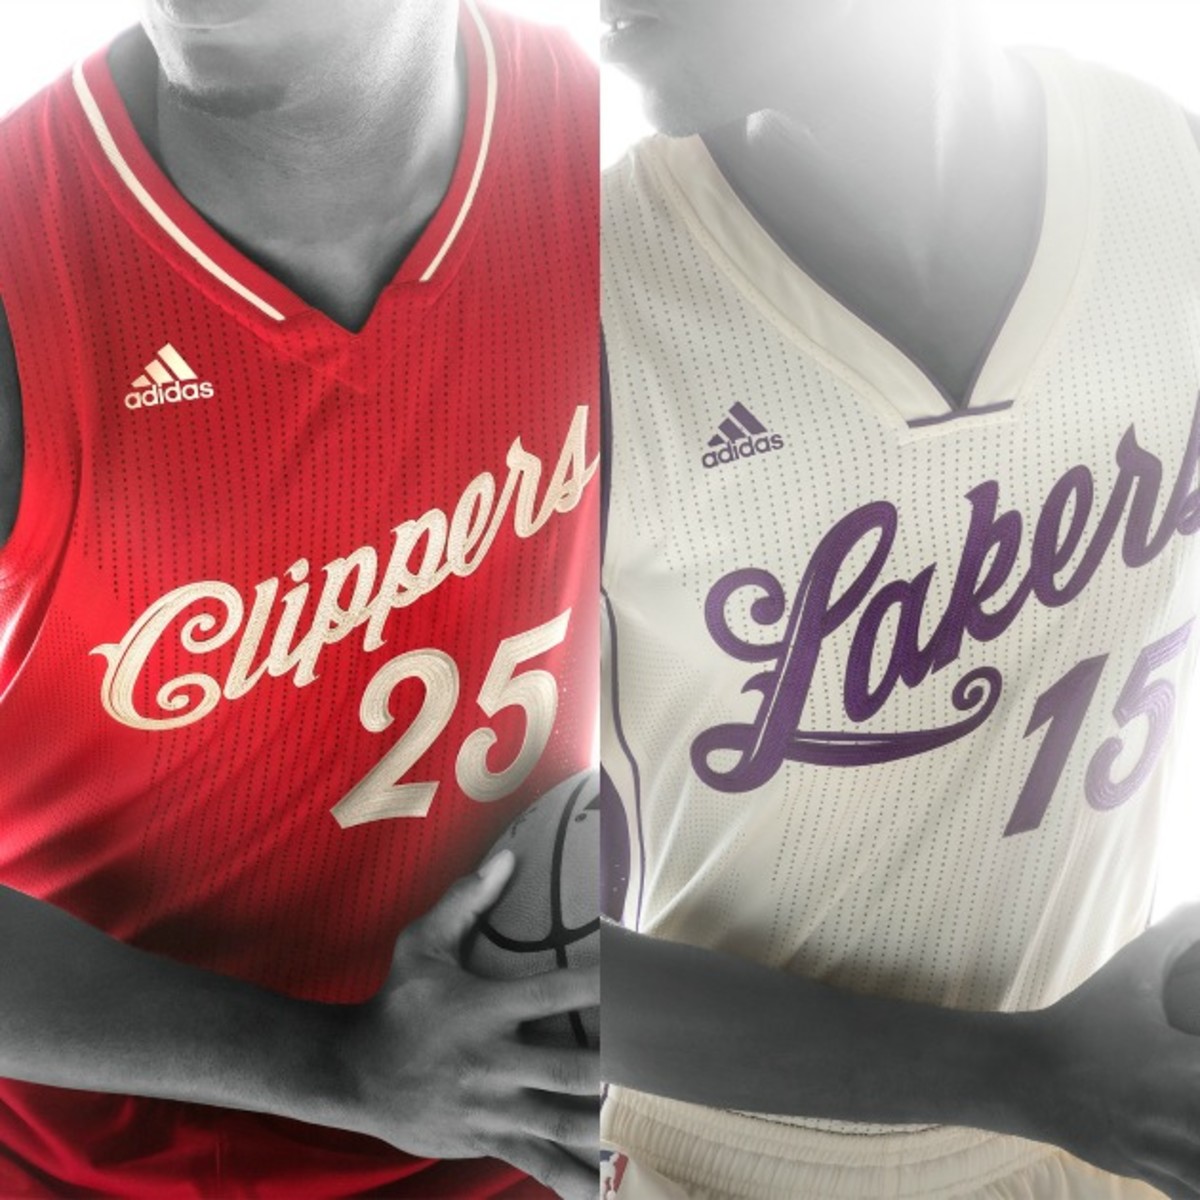 adidas Shows Off Christmas 2015 NBA Uniforms and Footwear